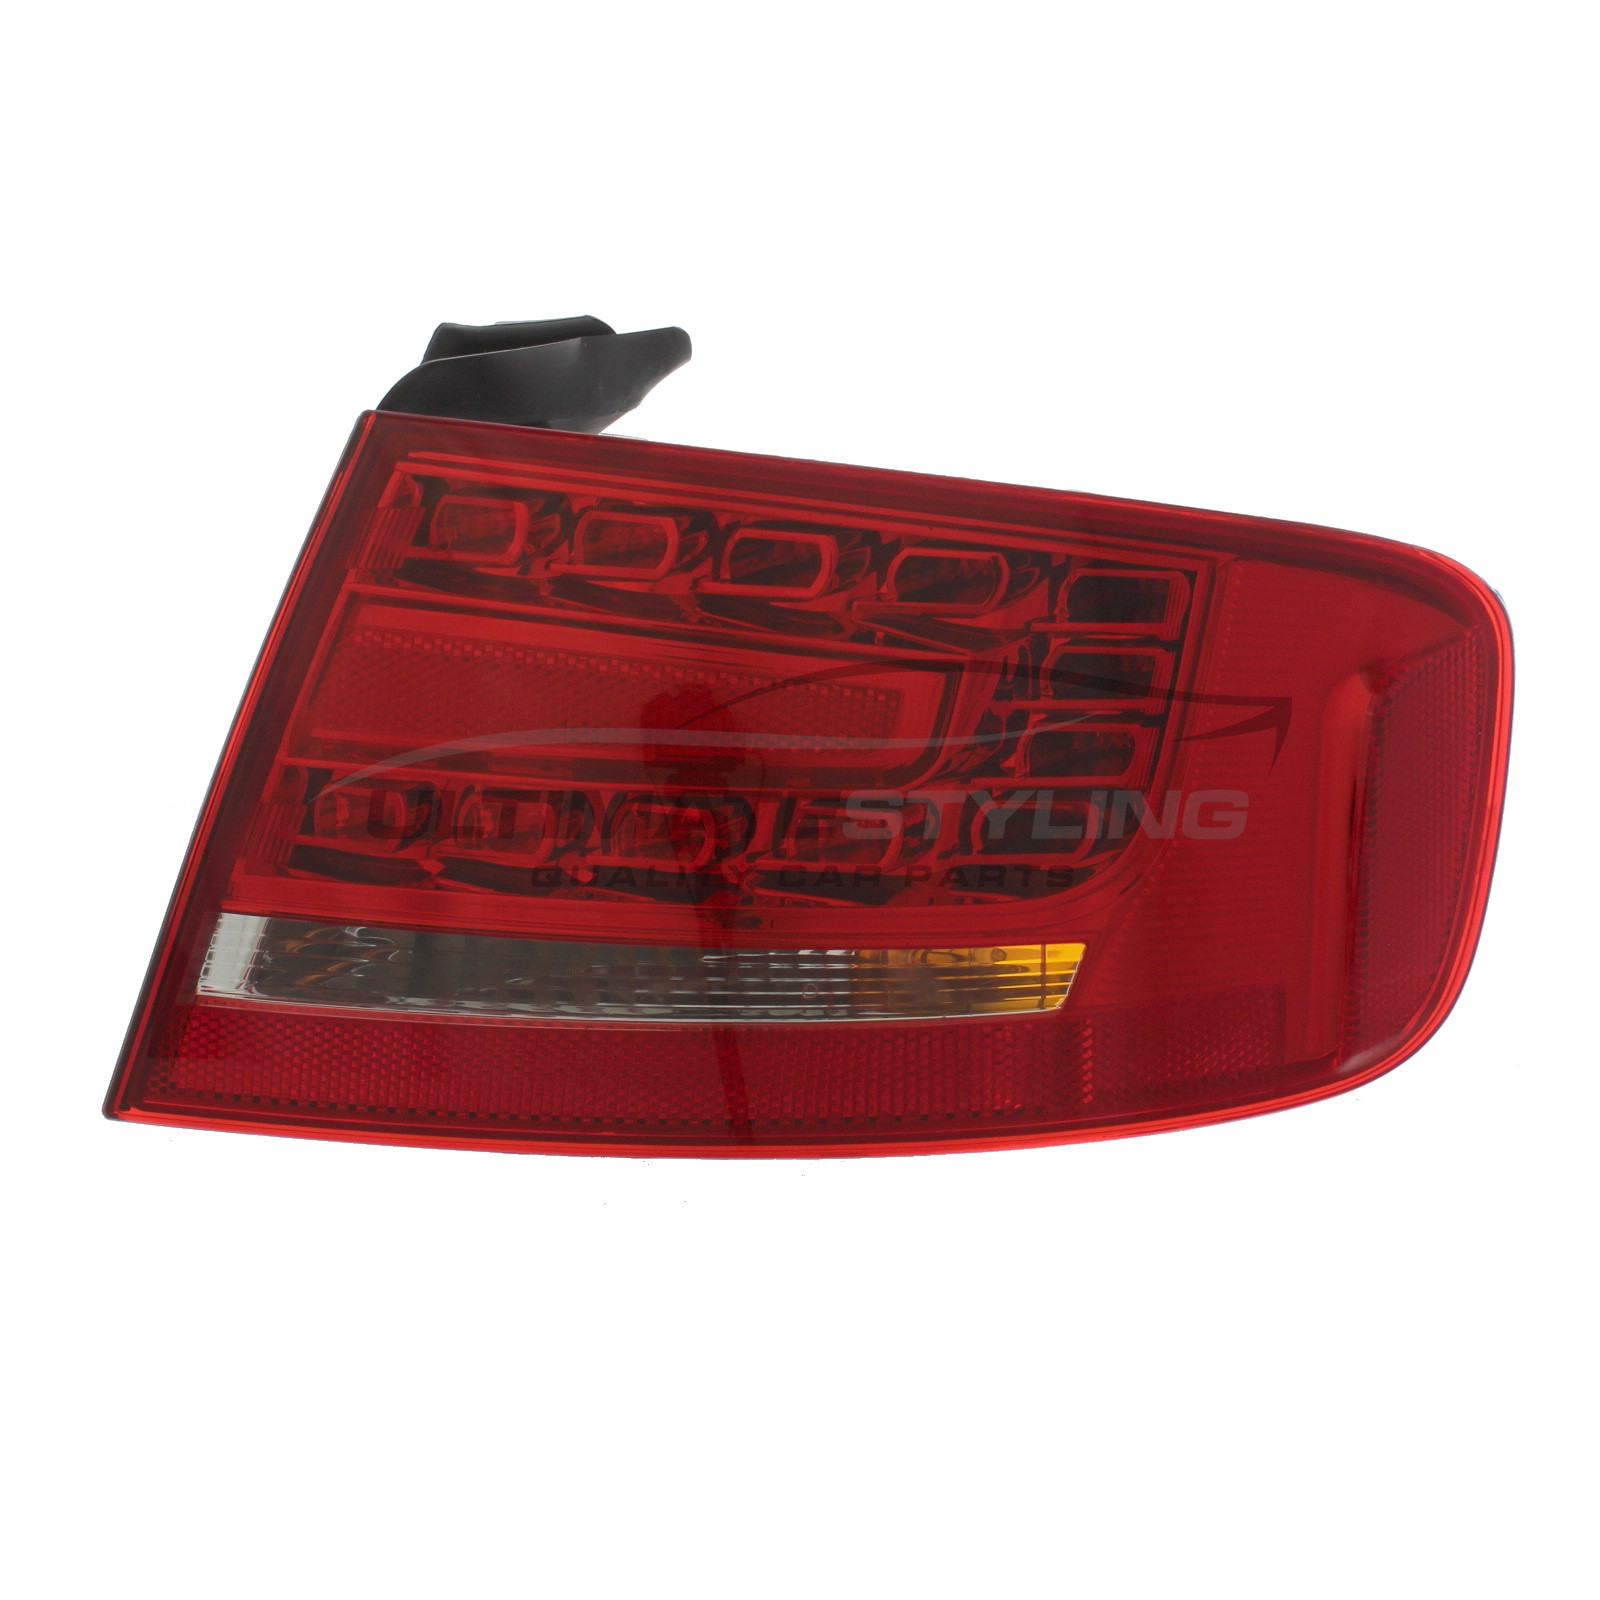 Audi A4 2008-2012 / Audi S4 2009-2012 LED Outer (Wing) Rear Light / Tail Light Excluding Bulb Holder Drivers Side (RH)